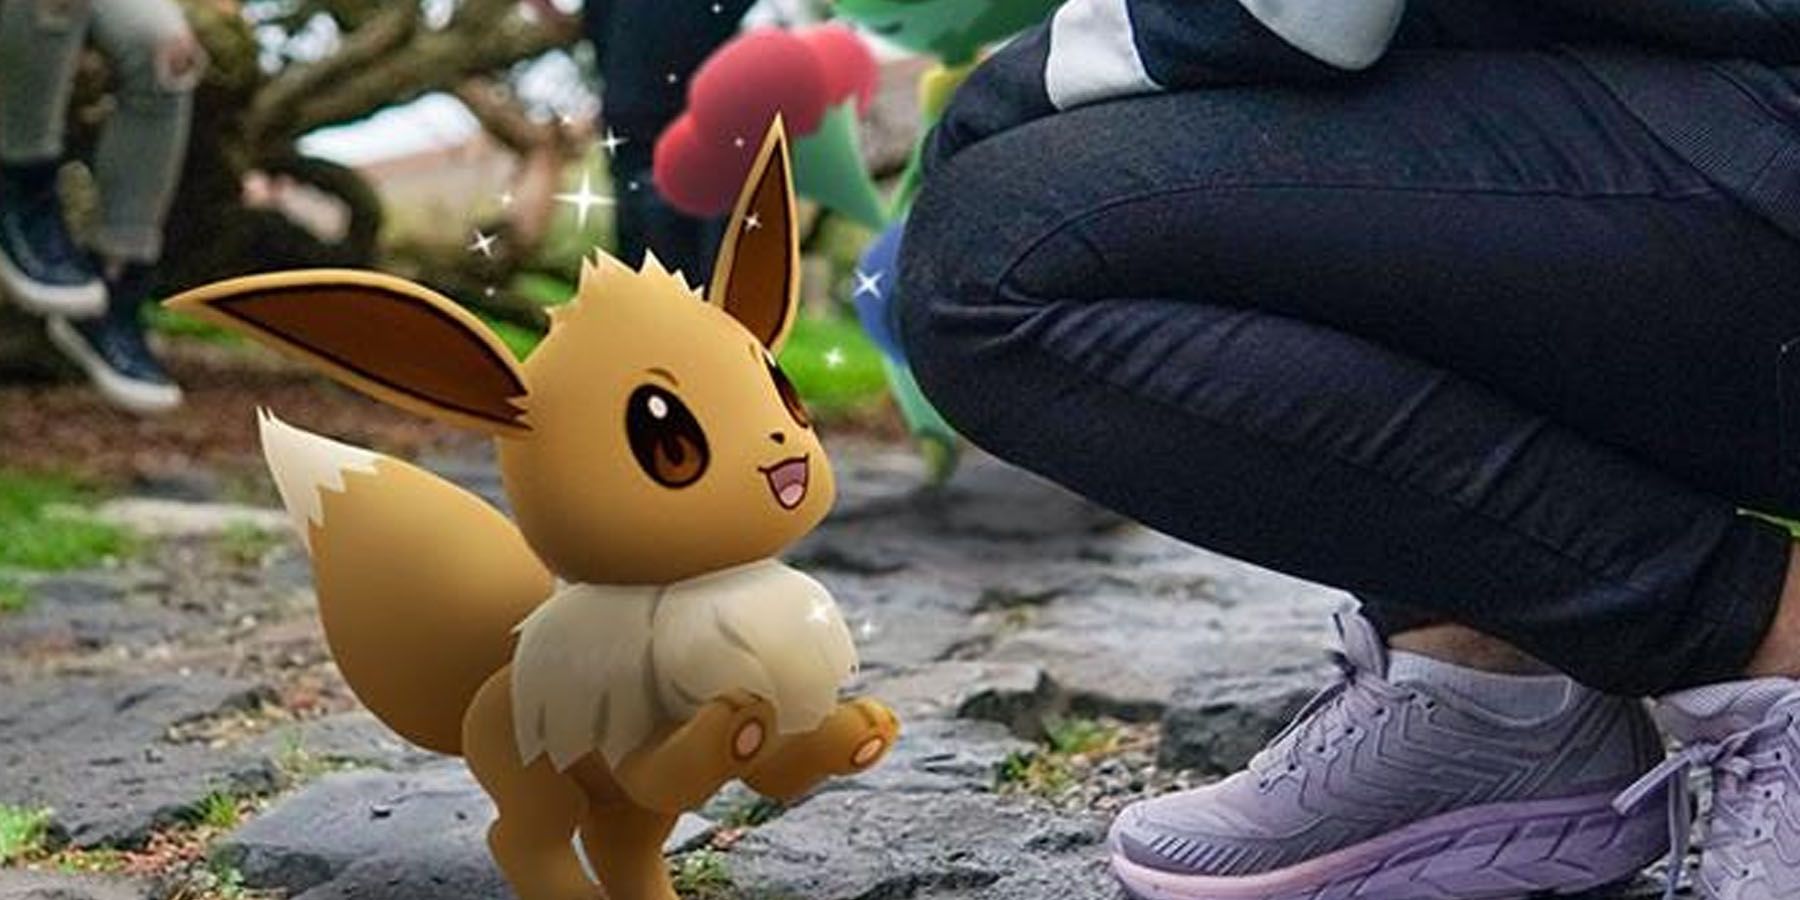 Eevee giving its player a Berry in Pokemon GO